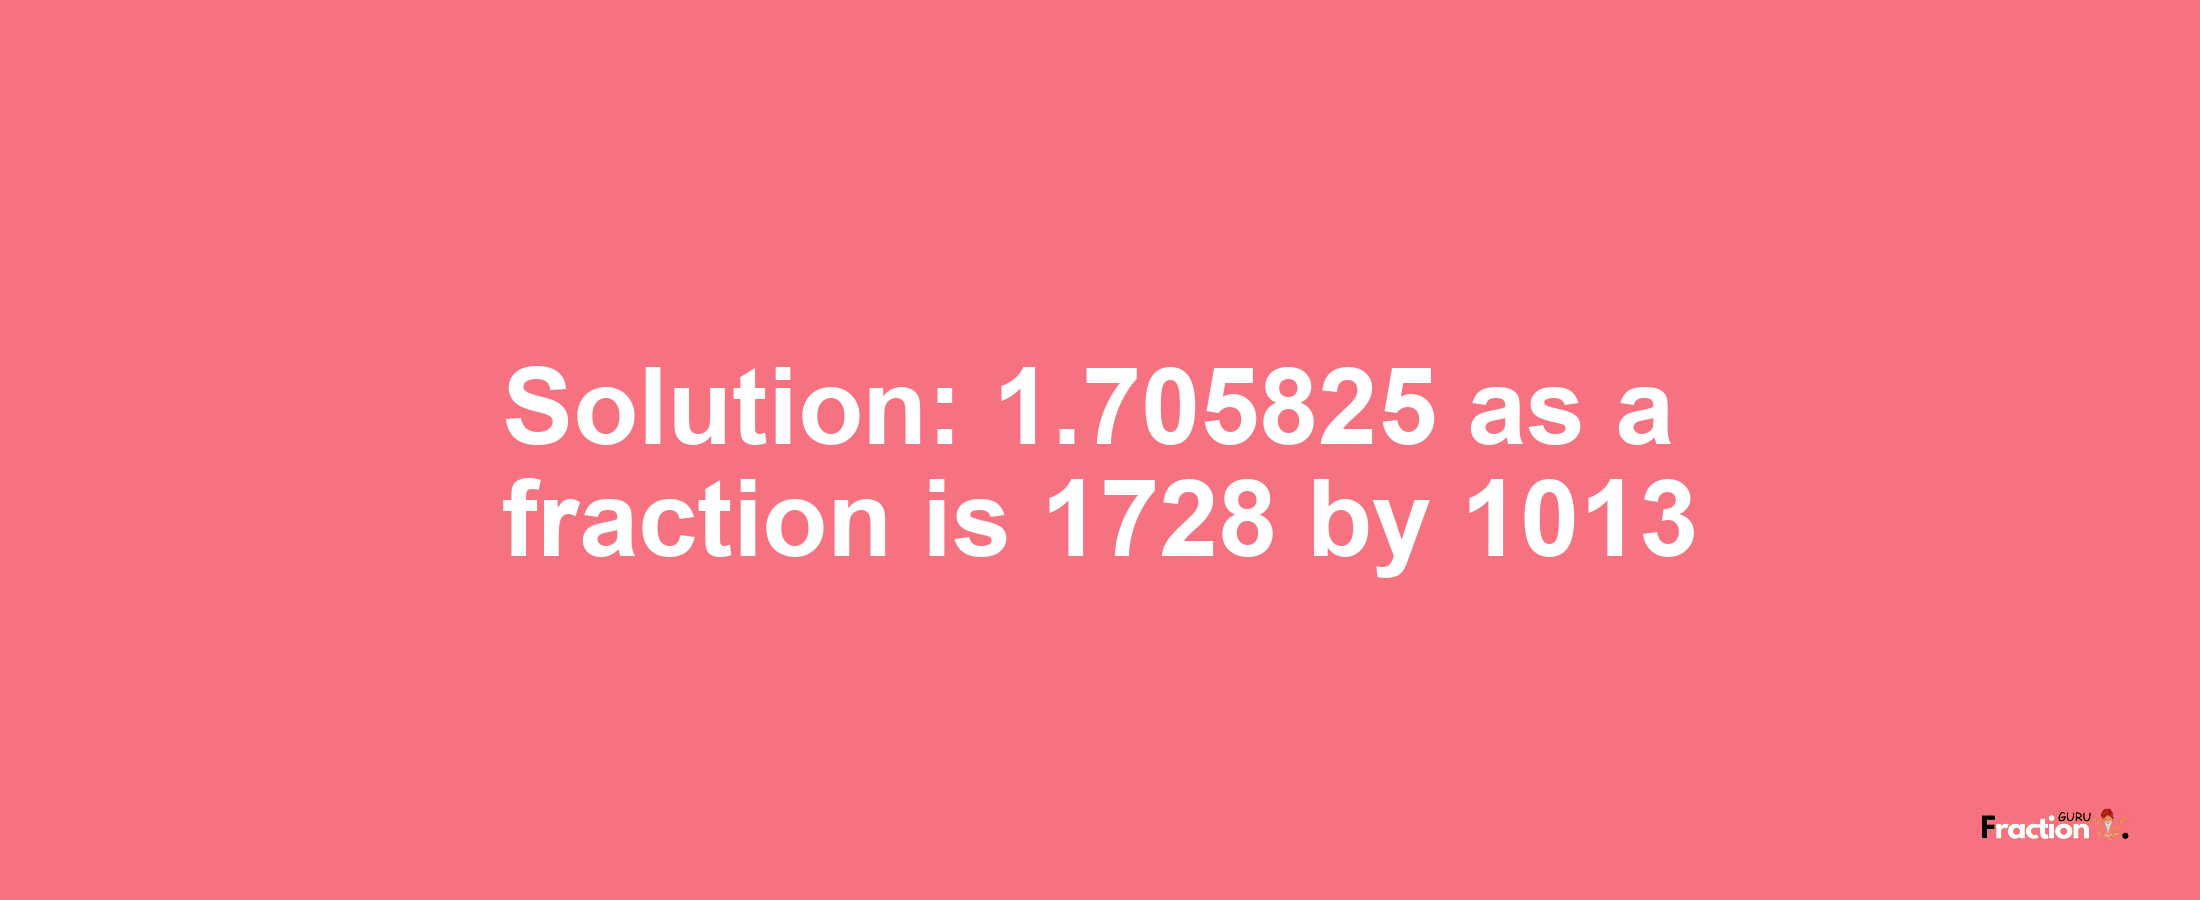 Solution:1.705825 as a fraction is 1728/1013